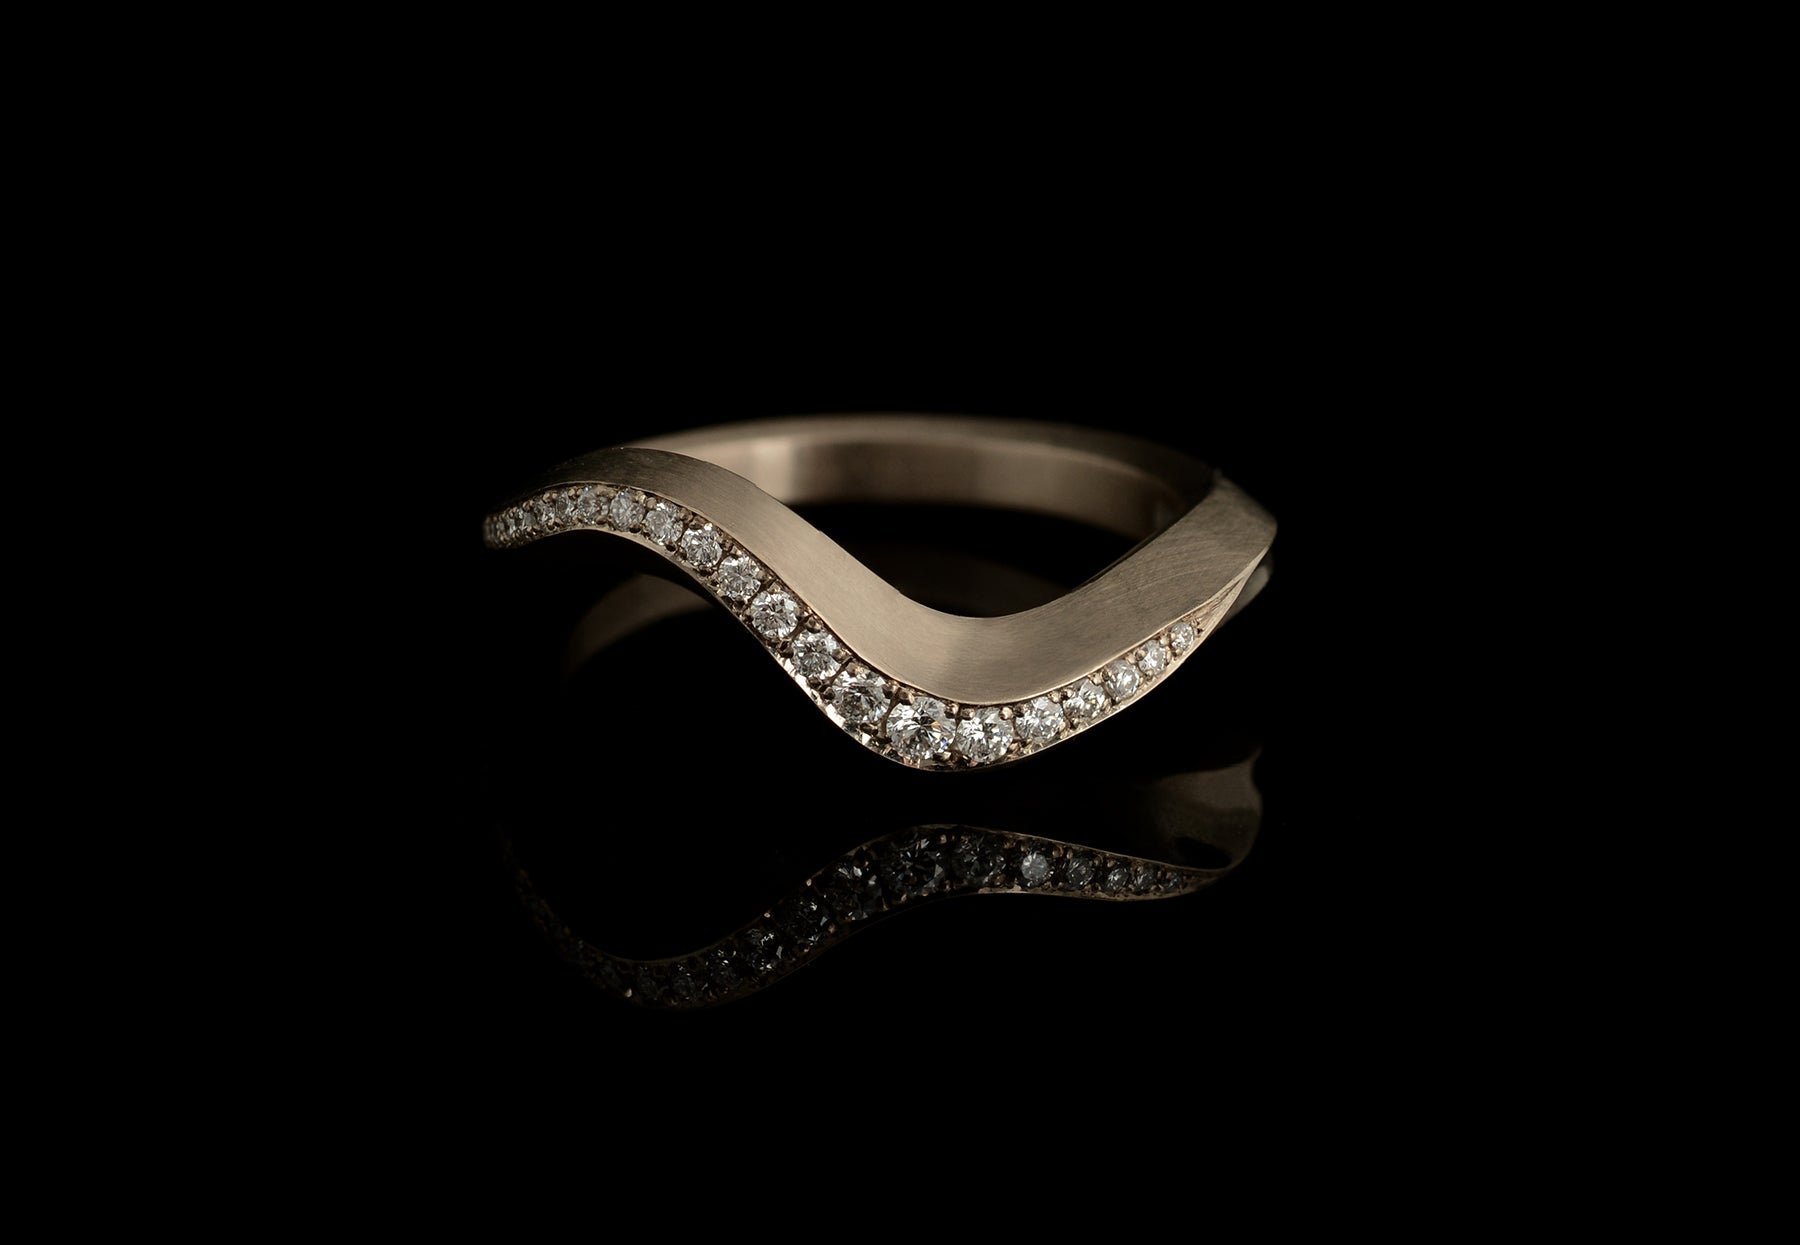 Arris carved wedding ring with pave diamonds